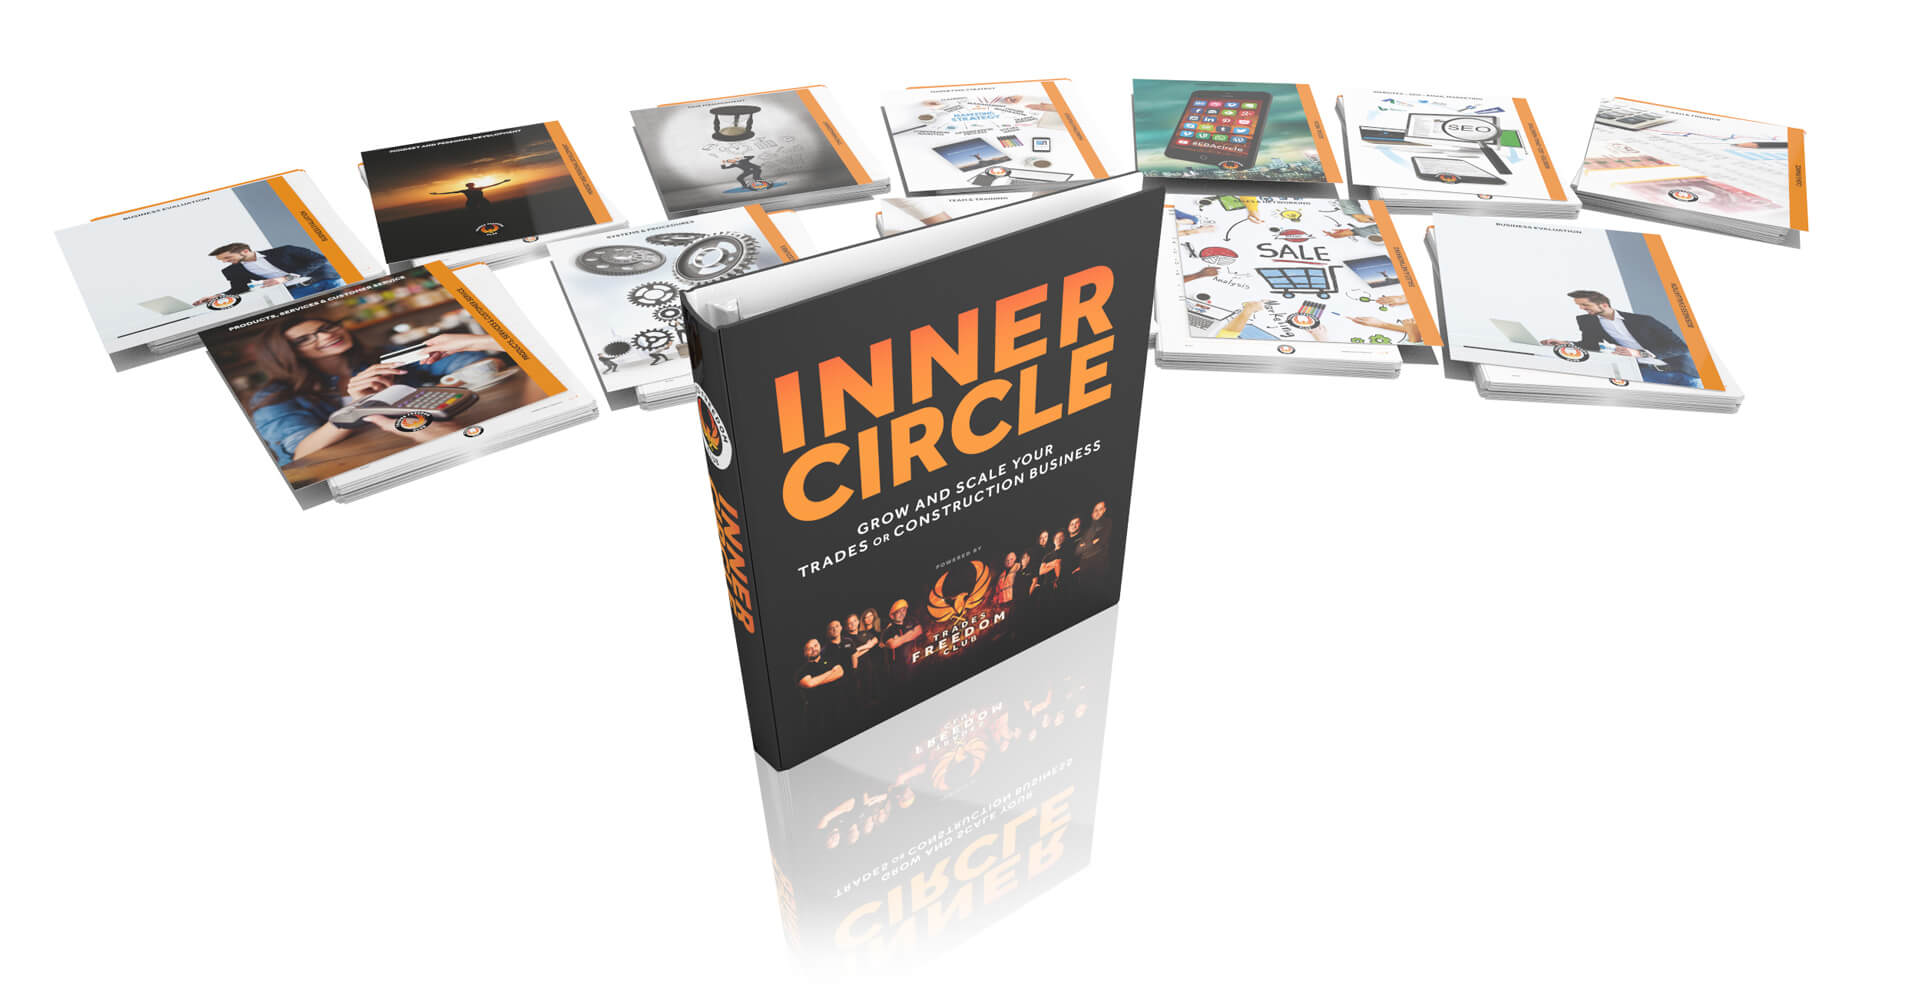 inner circle trades business coaching